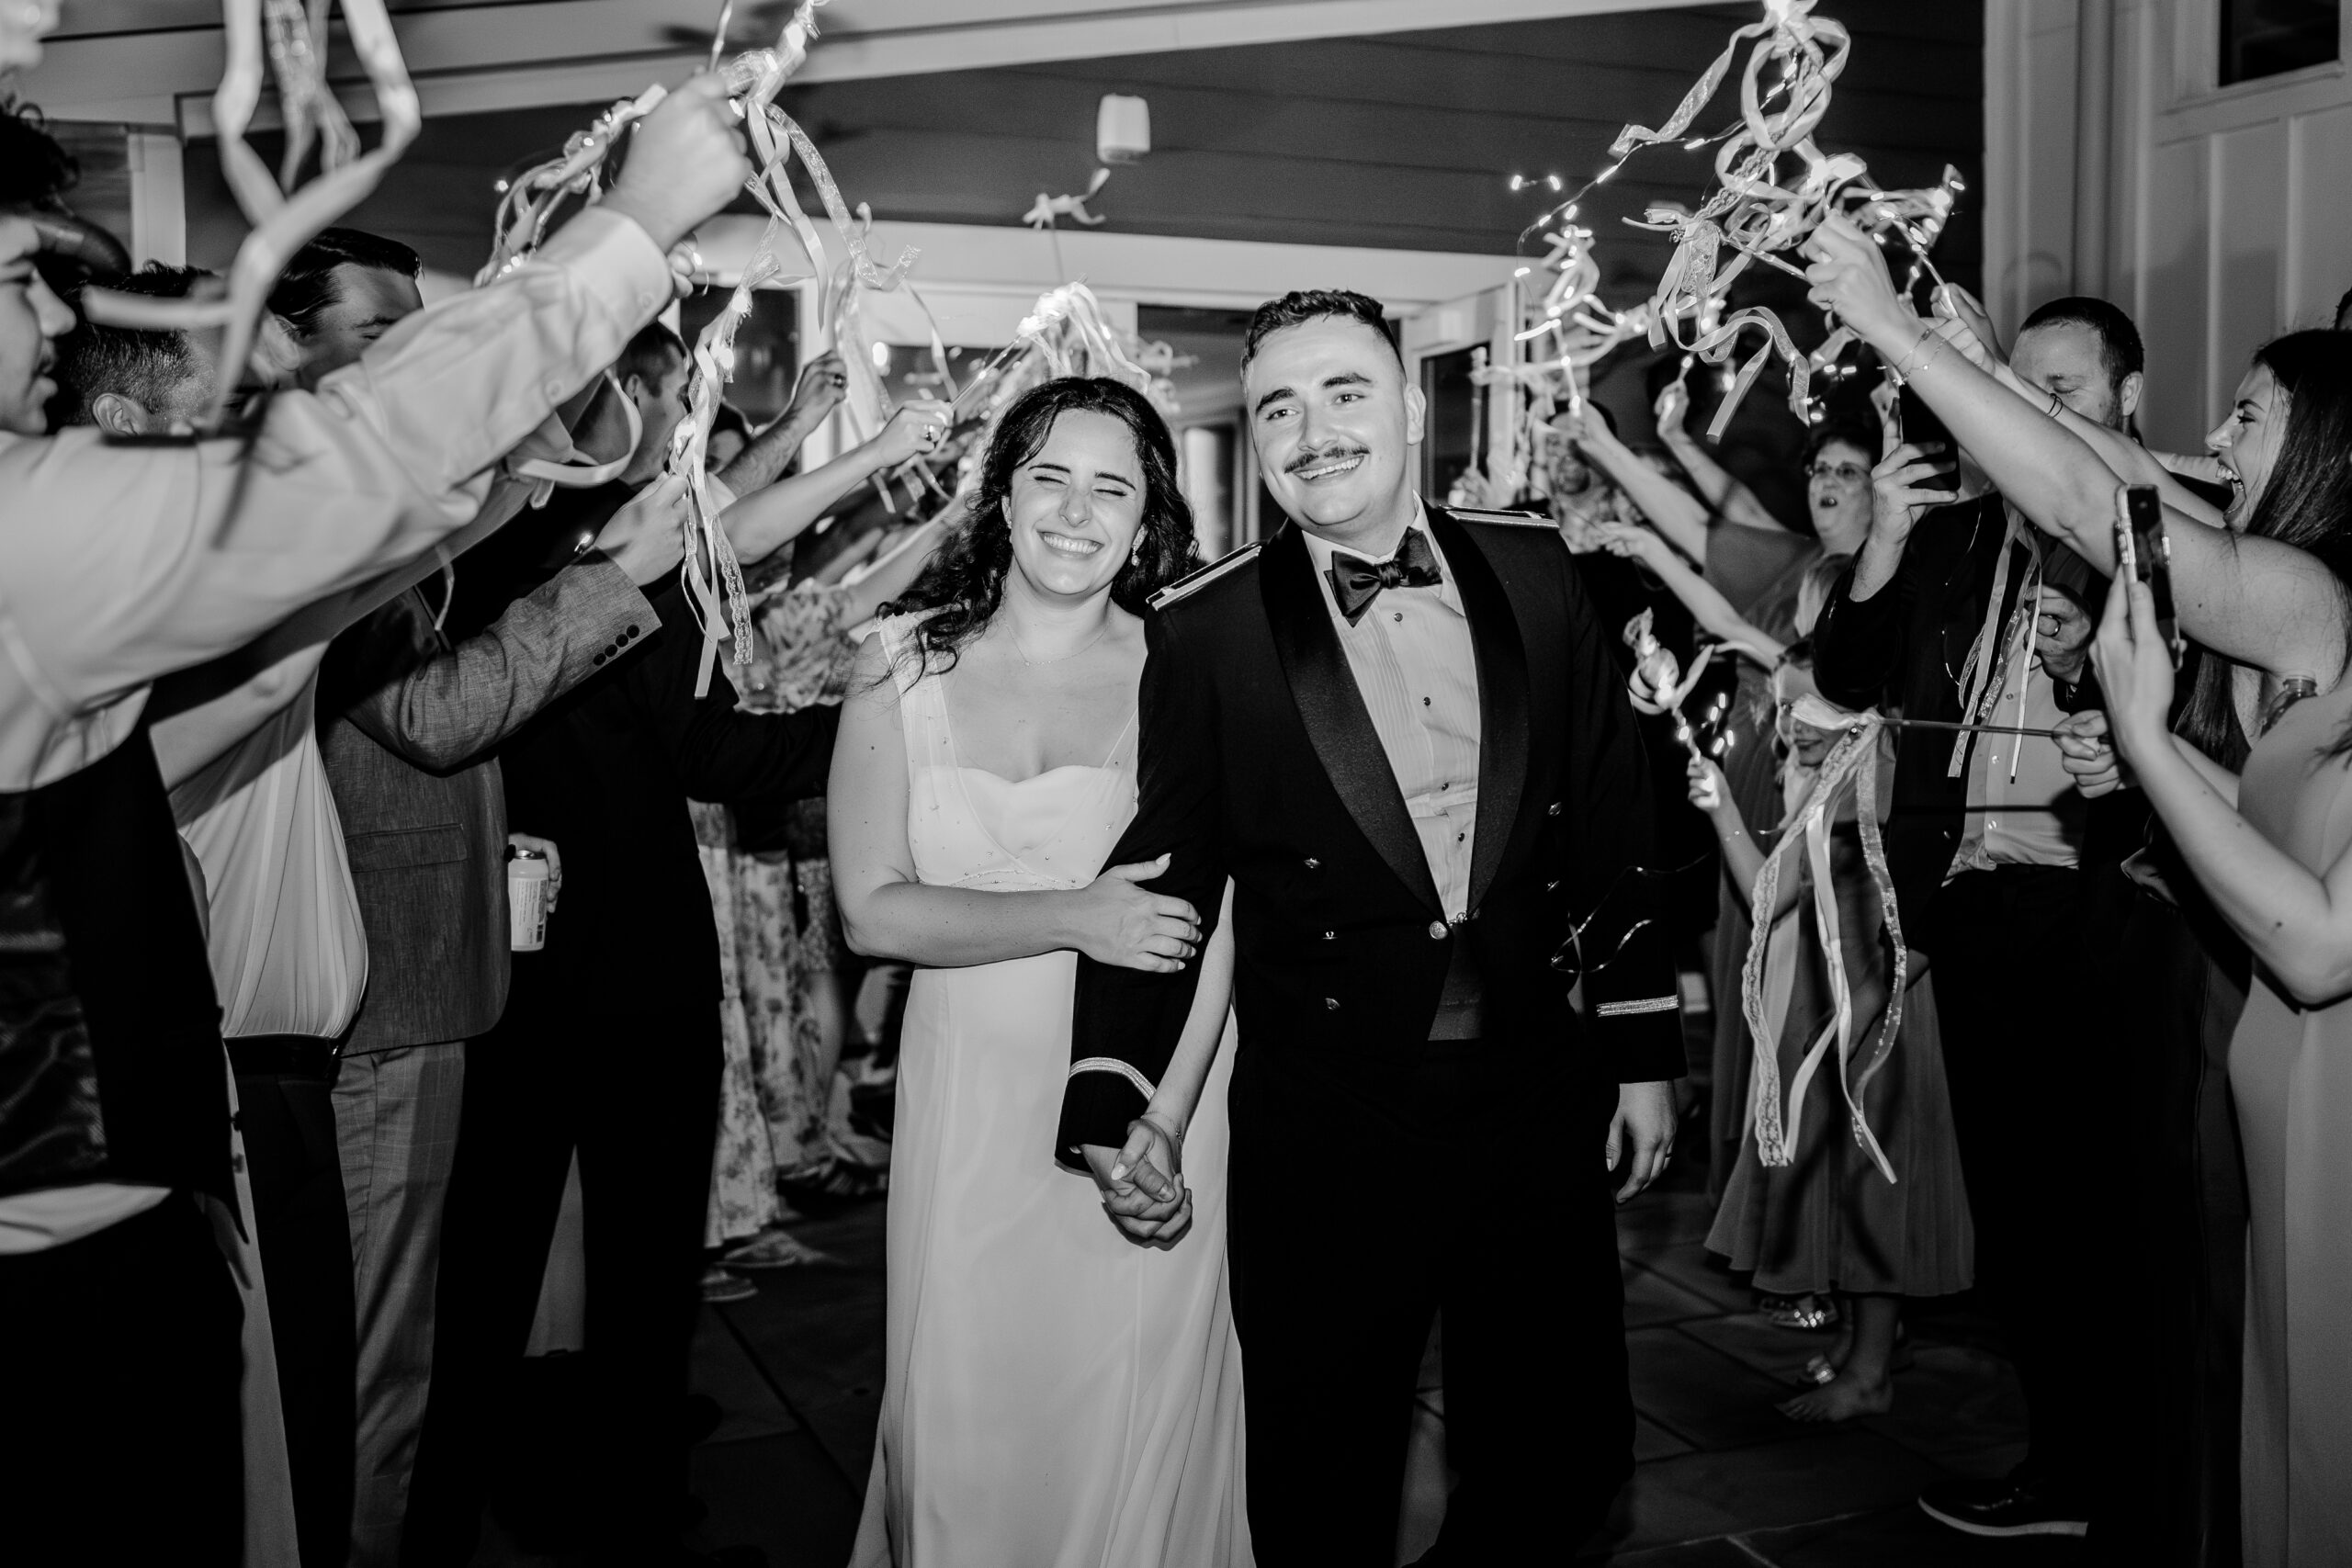 A bride and groom smile as they go through a tunnel between wedding guests waving light up ribbons after their tented wedding reception at Historic Blenheim in Fairfax Virginia